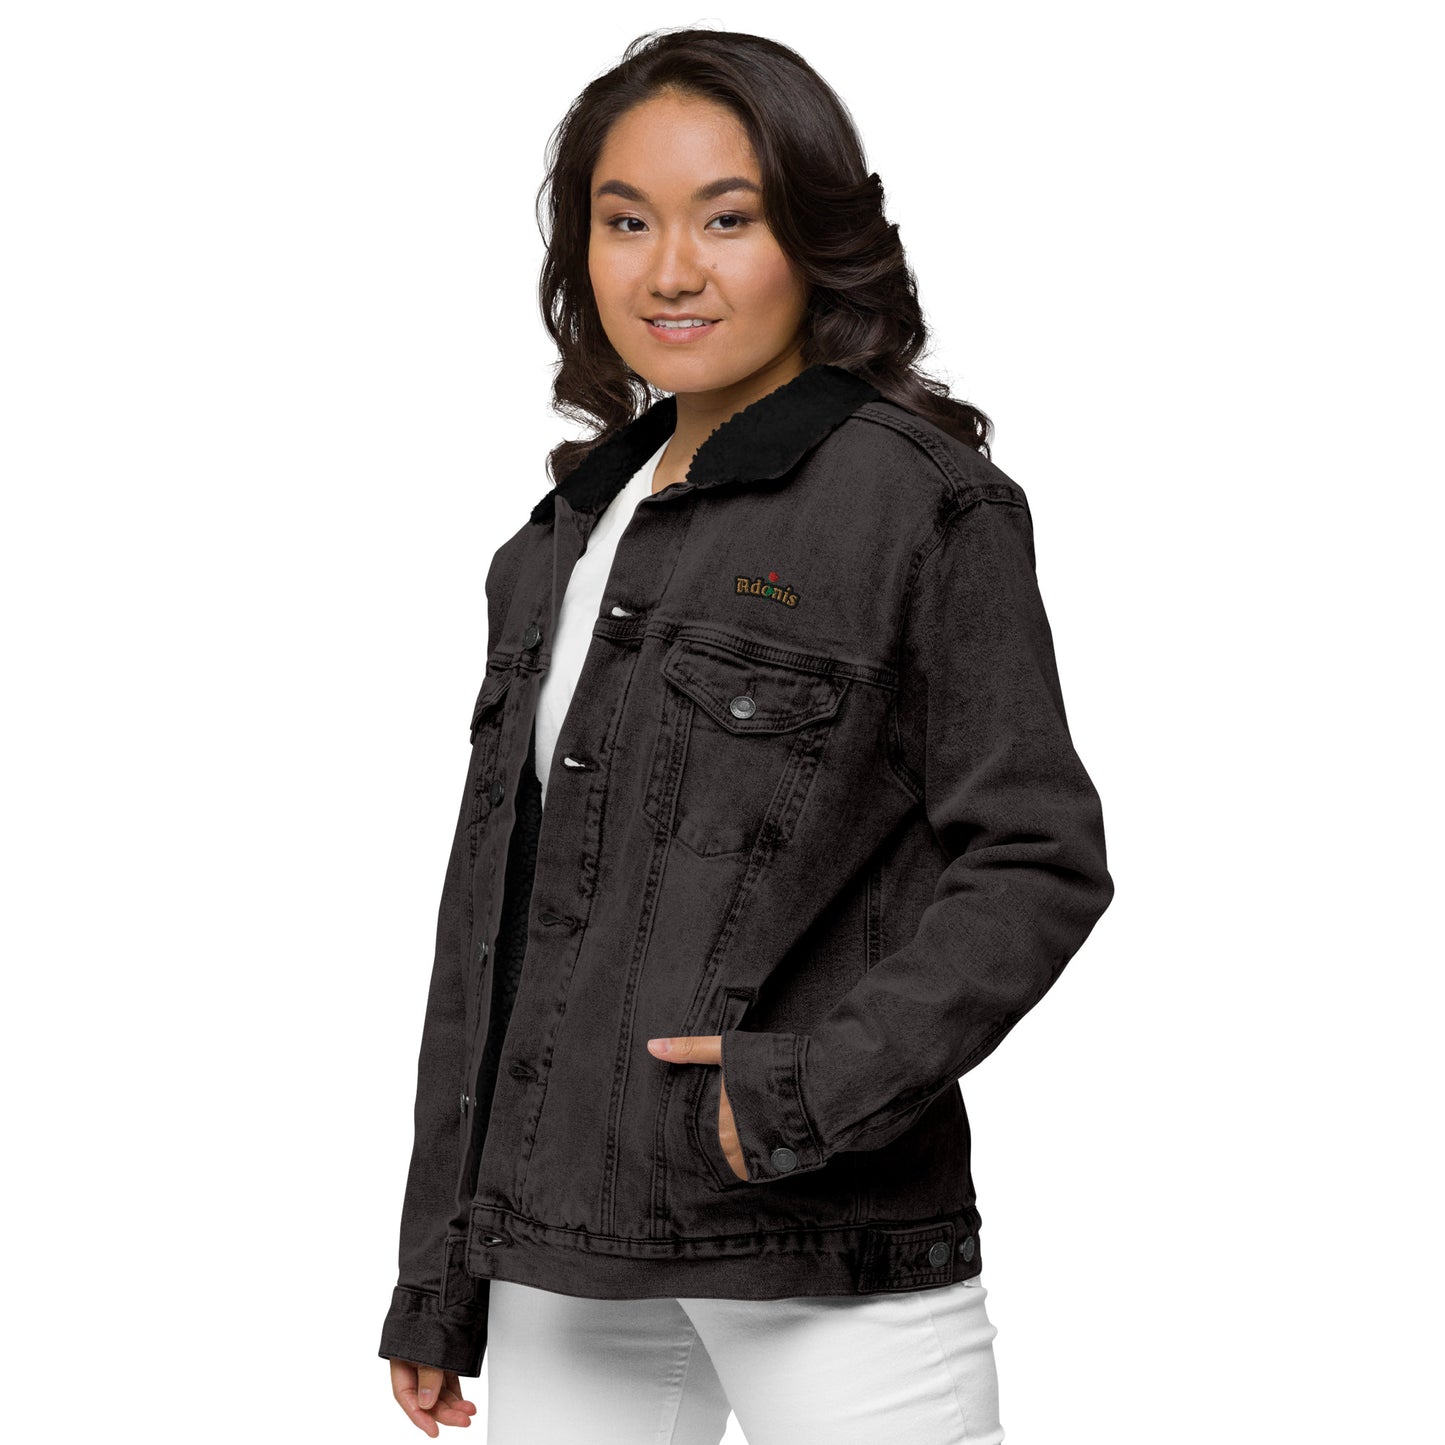 Adonis-Creations - Women's Embroidered Denim Jacket With Fur